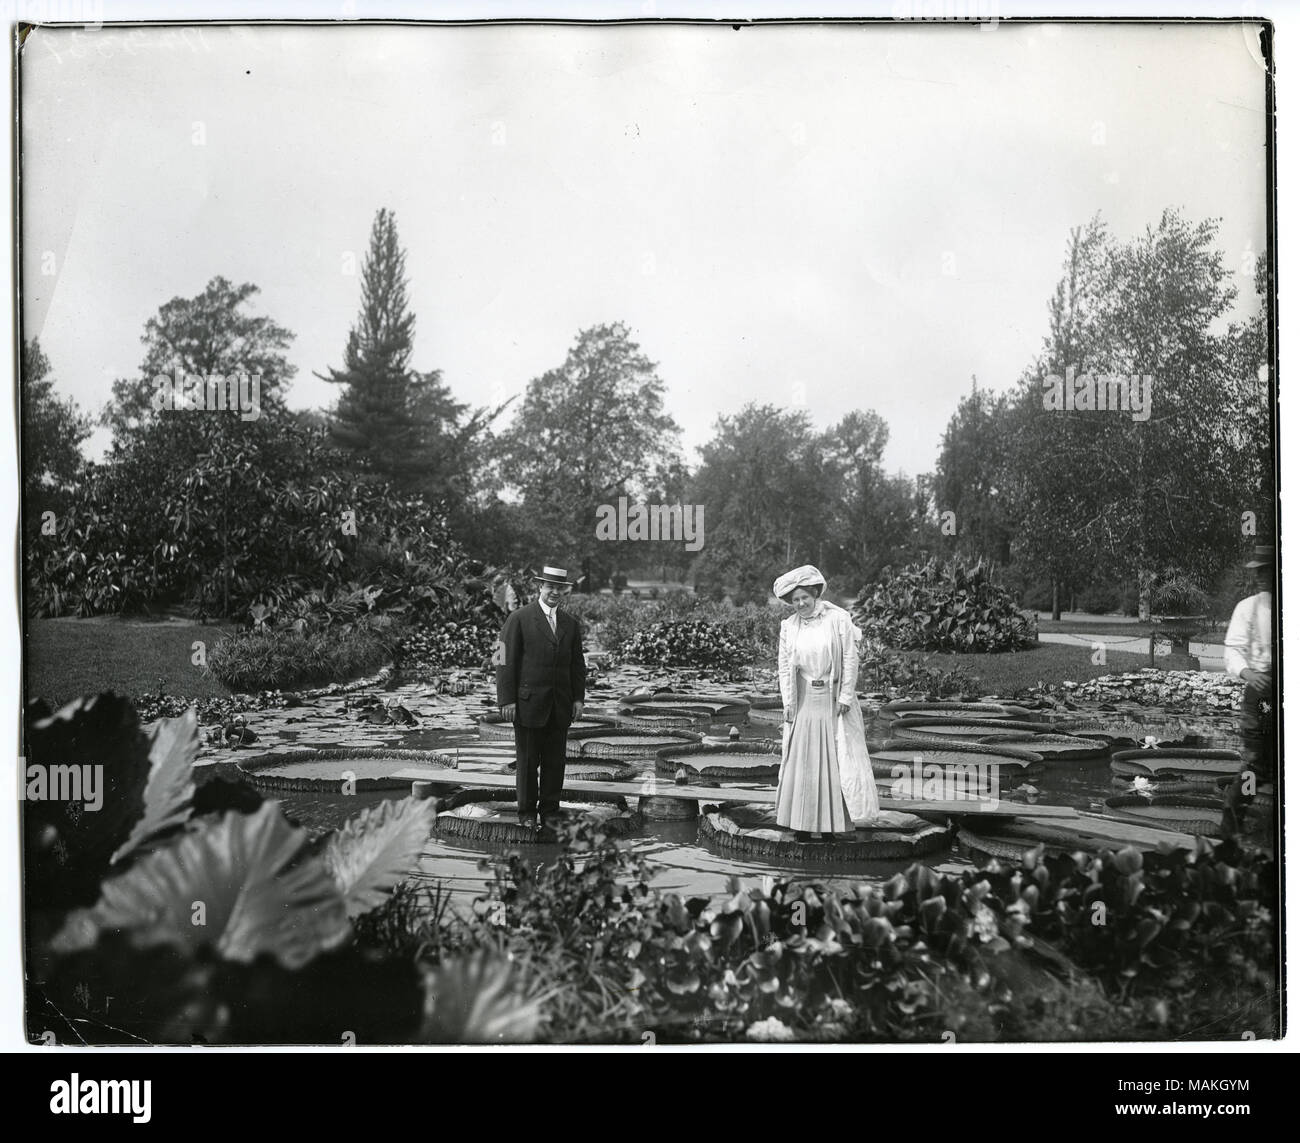 Horizontal, black and white photograph showing a man and a woman standing on giant lily pads in the lily pond at Tower Grove Park. The man is wearing a suit and a boater hat, while the woman is wearing a long, light-weight coat over her skirt and blouse, as well as a large hat. Wooden boards run behind the man and woman, connecting several of the lily pads. Other lily pads and a variety of trees and bushes can be seen in the background. A handwritten note on the back of the print, possibly from Dr. William Swekosky, reads: 'Standing on Lily Pads Tower Grove Park.' Title: Tower Grove Park Lily  Stock Photo